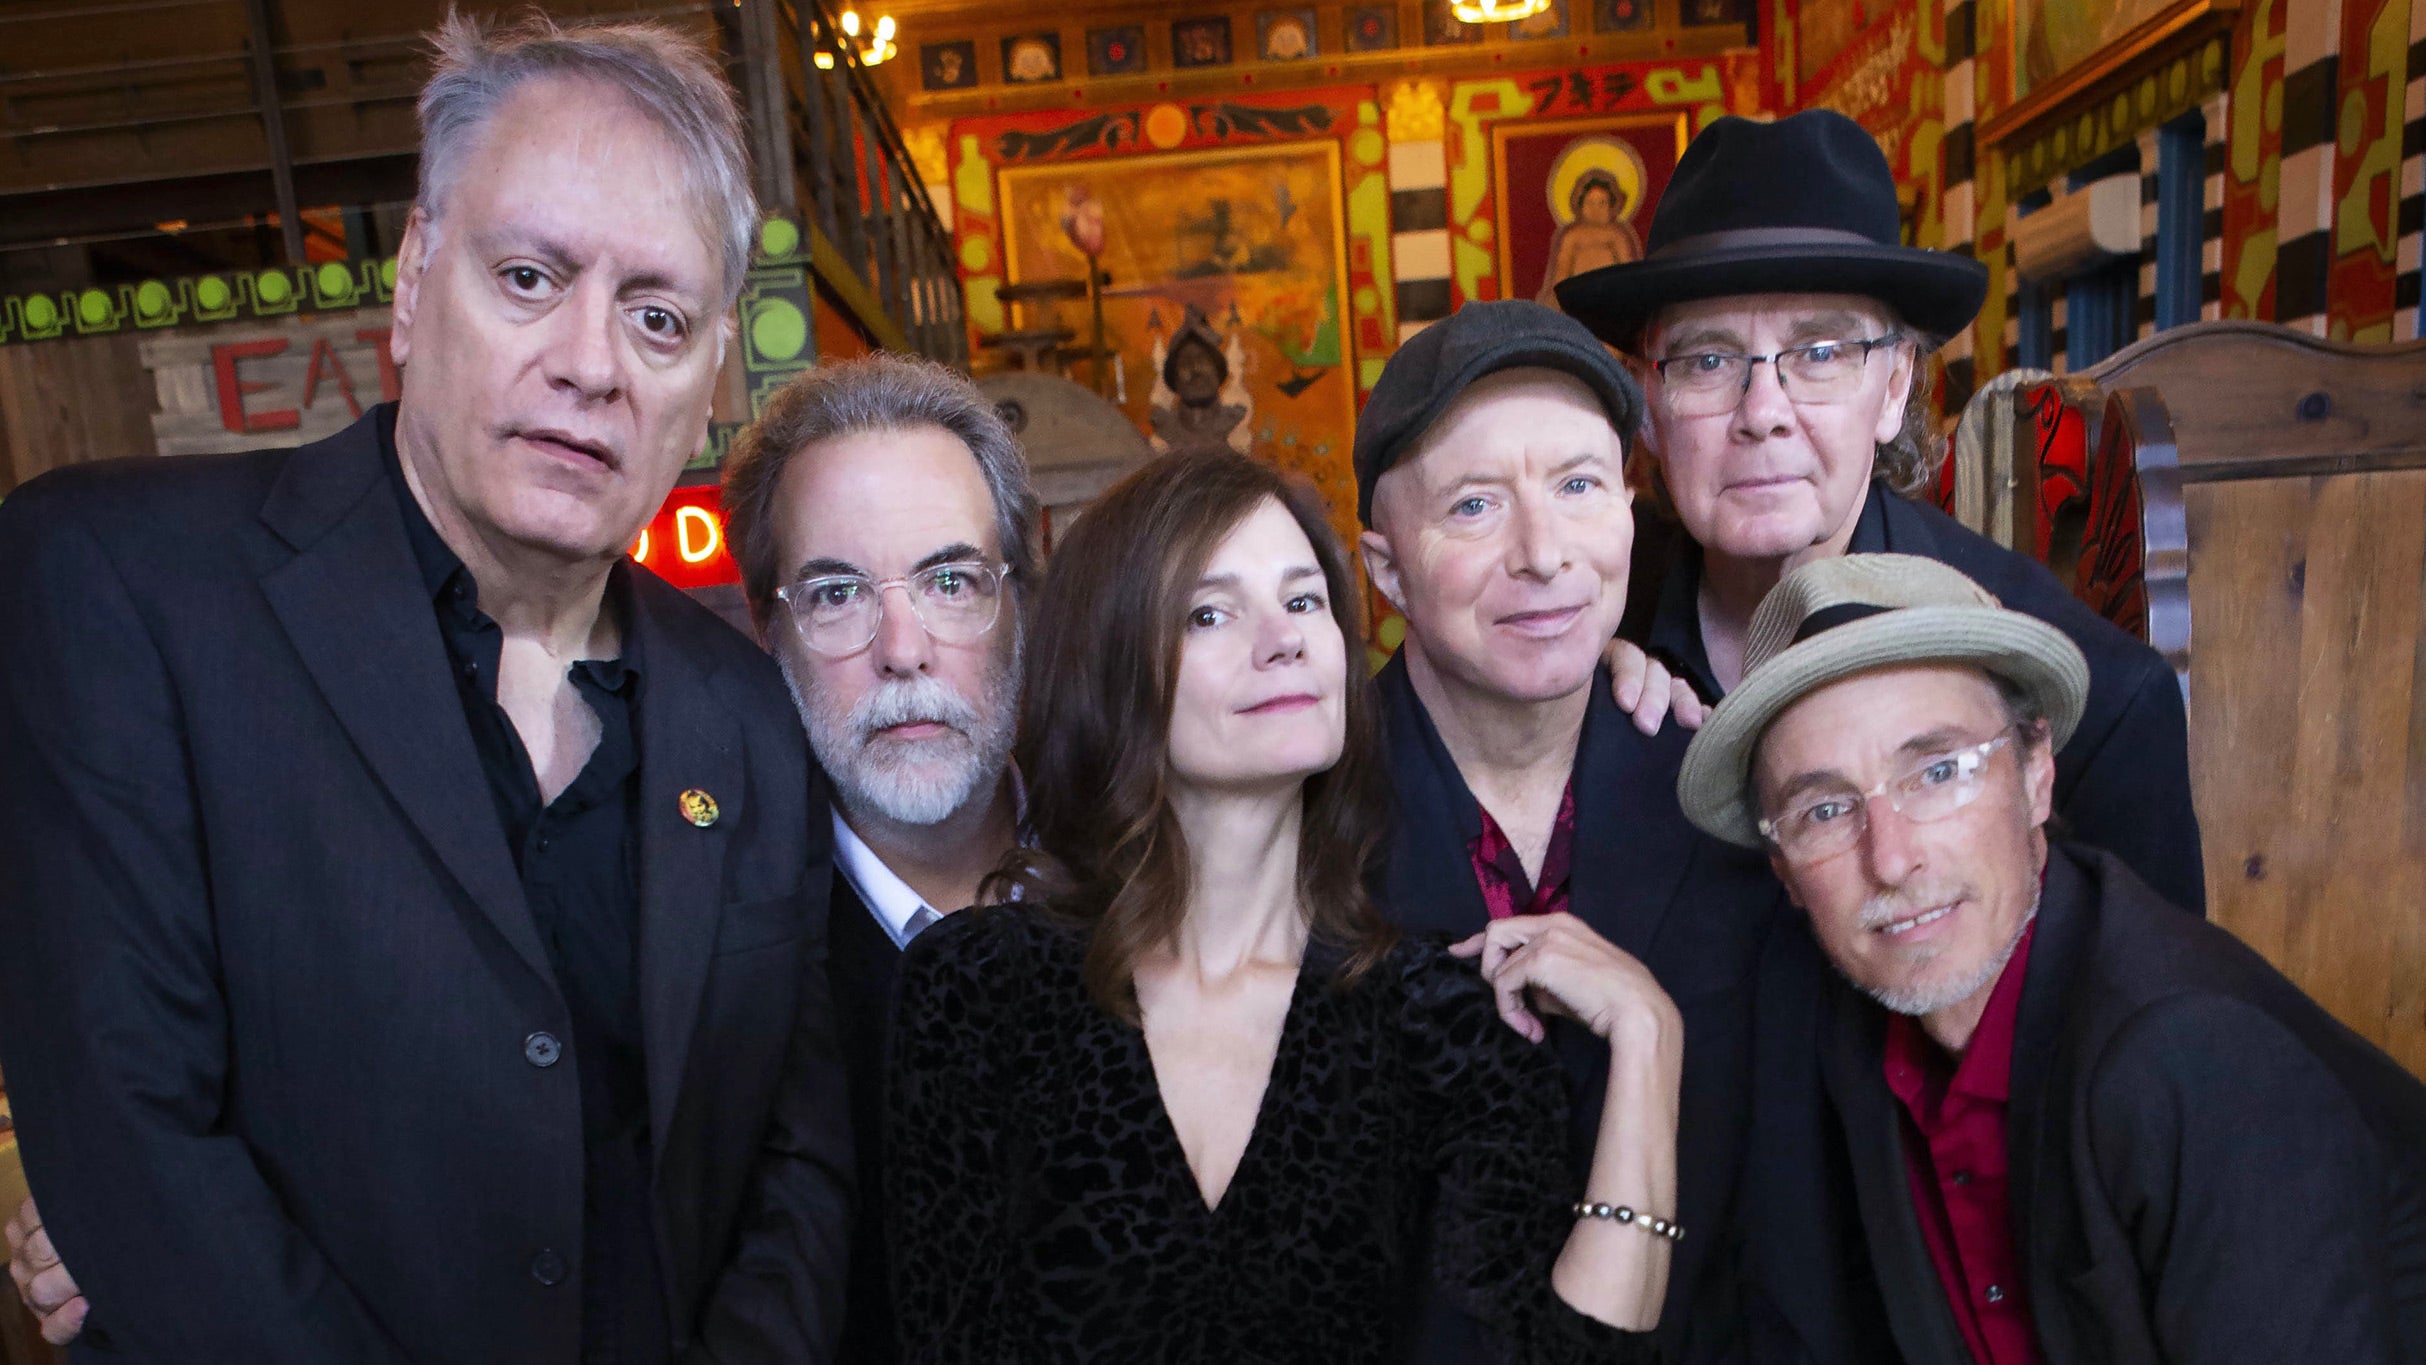 10,000 Maniacs in Red Bank promo photo for Member presale offer code